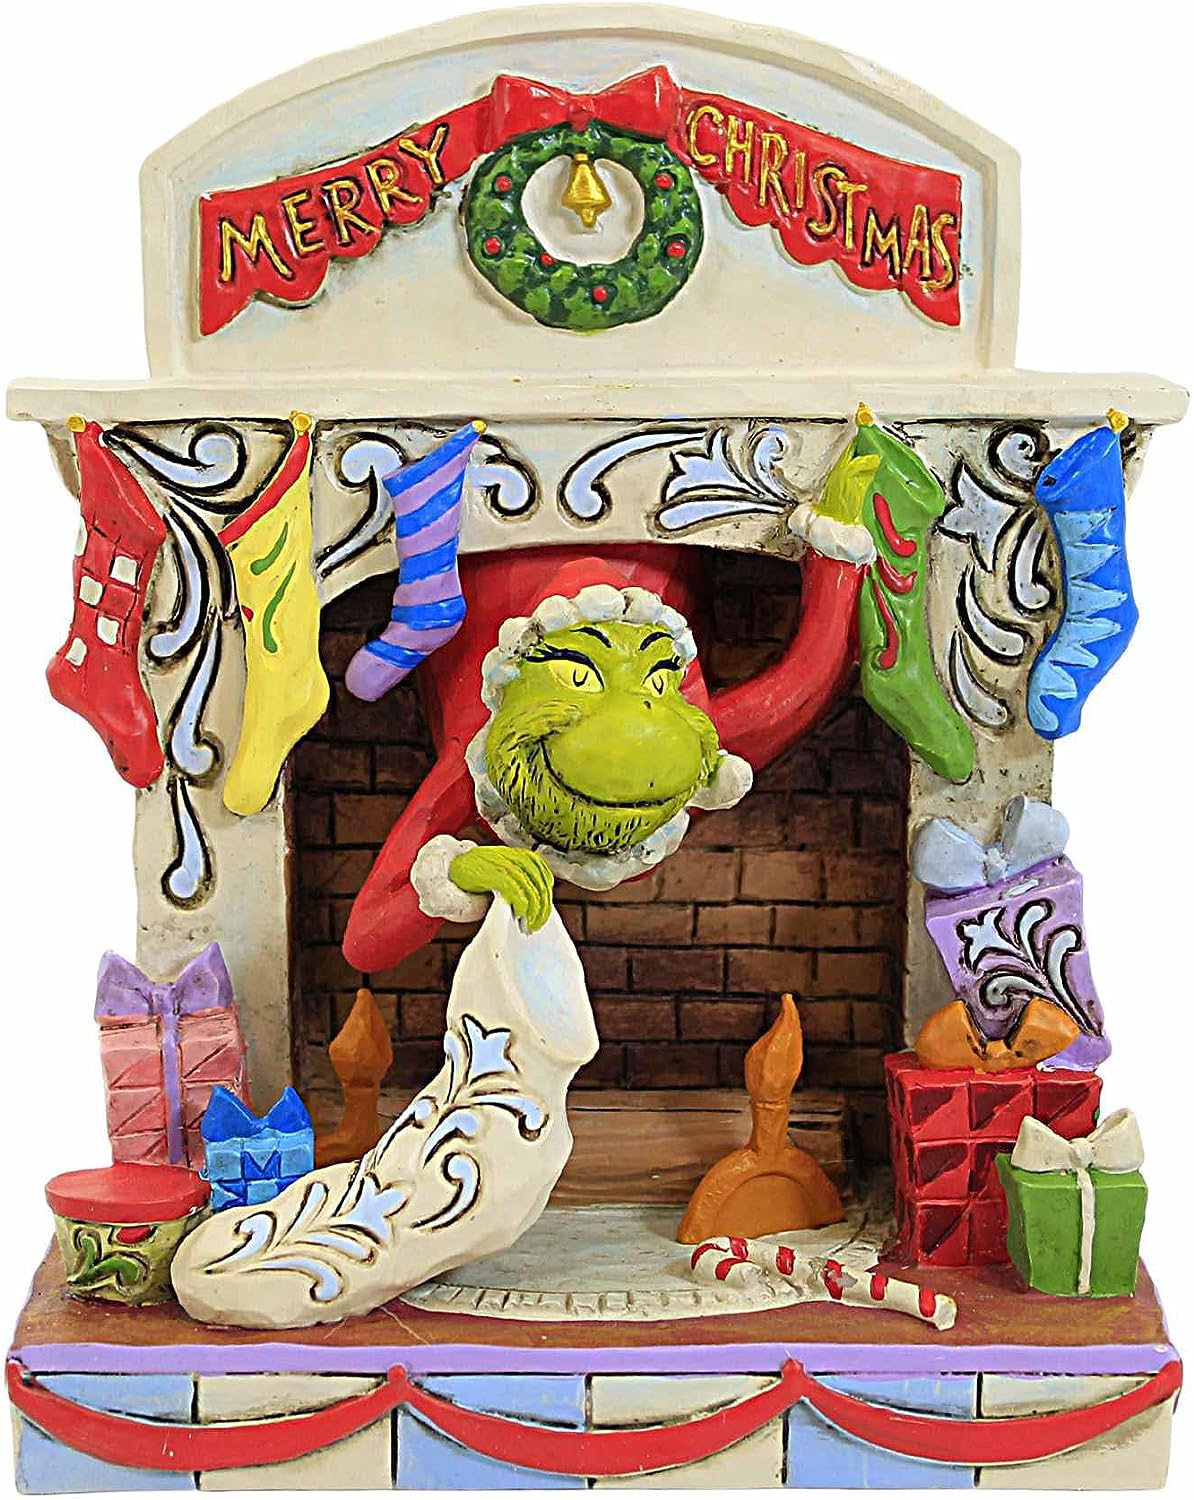 Grinch from the Fireplace figurine by Jim Shore